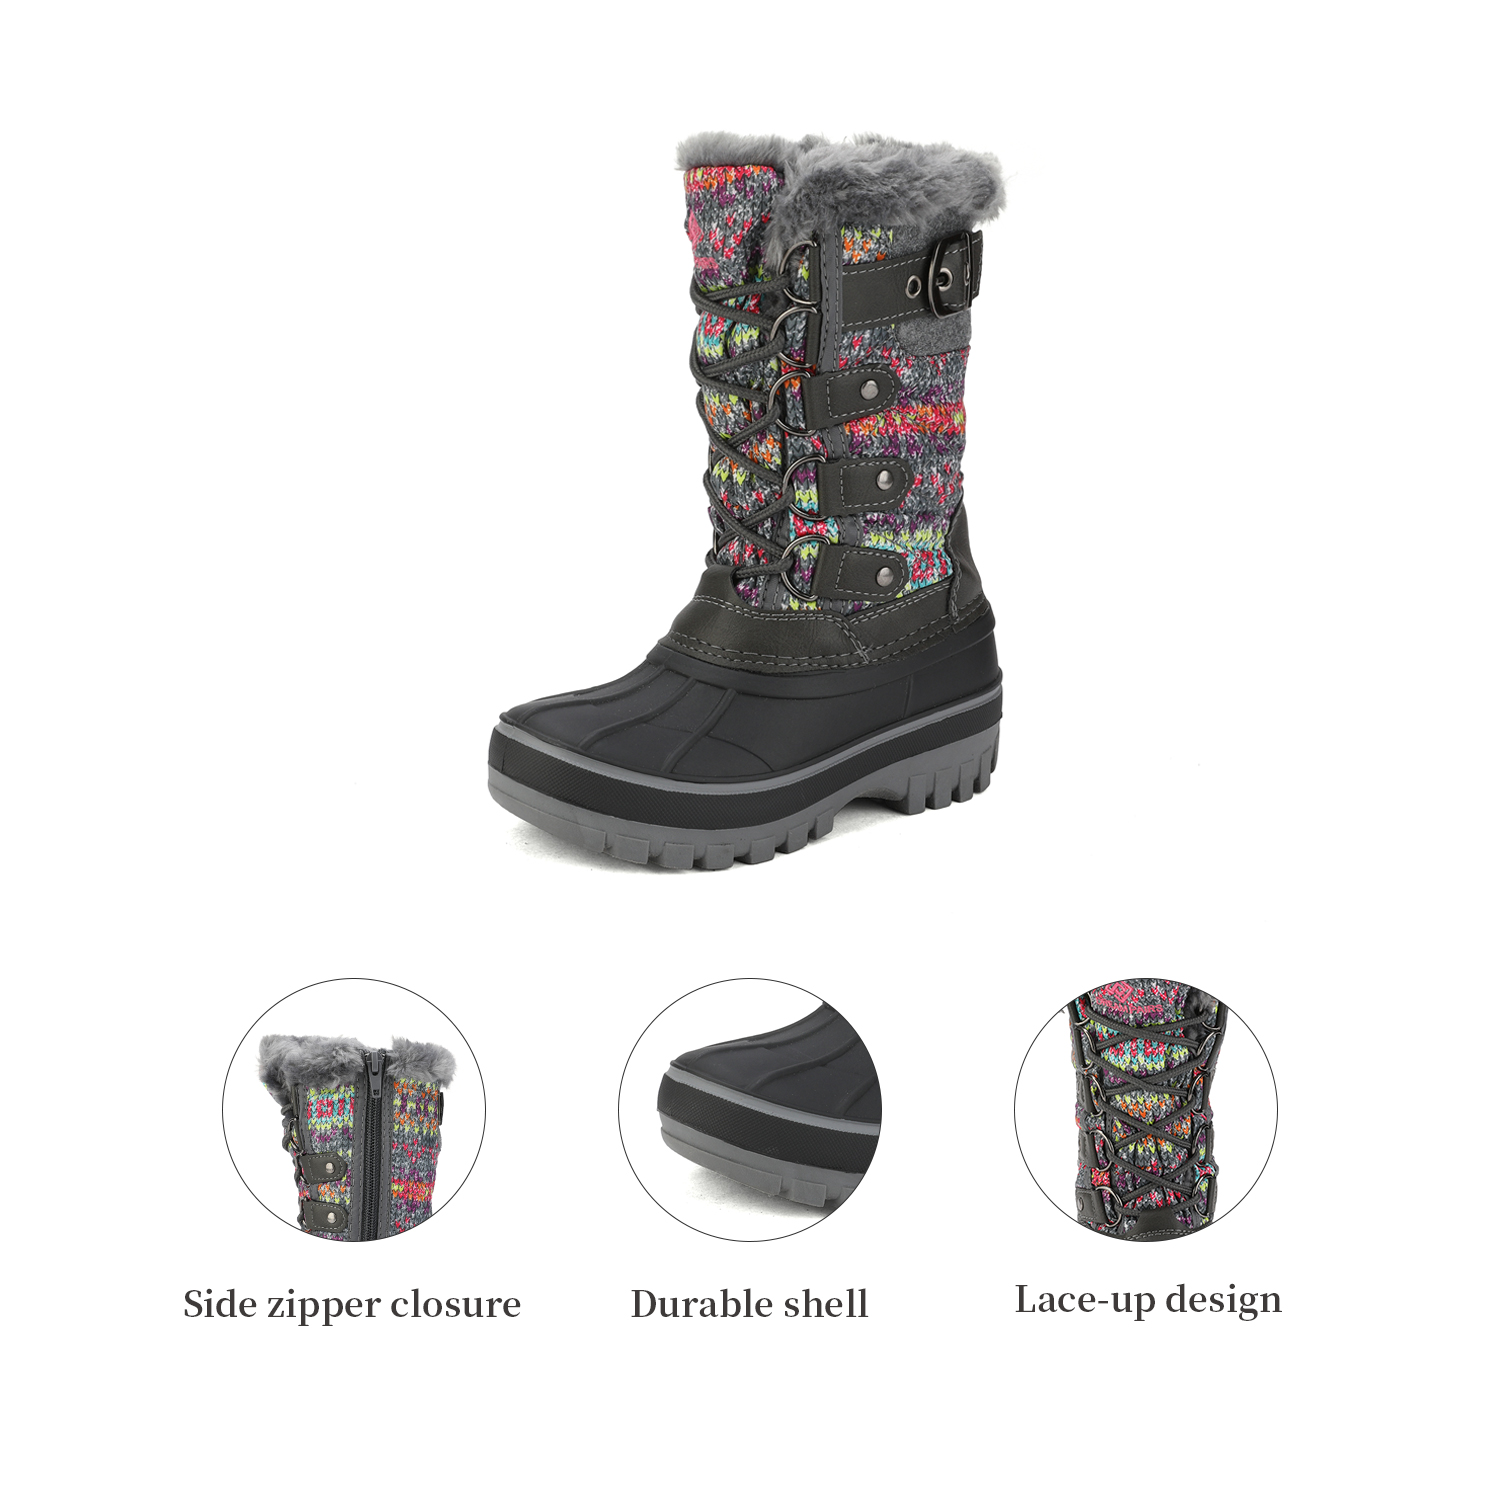 DREAM PAIRS Ankle Snow Boots Boys Girls Winter Warm Lace Up Waterproof Boots Shoes KRIVER-1 GREY/MULTI Size 6 - image 2 of 3